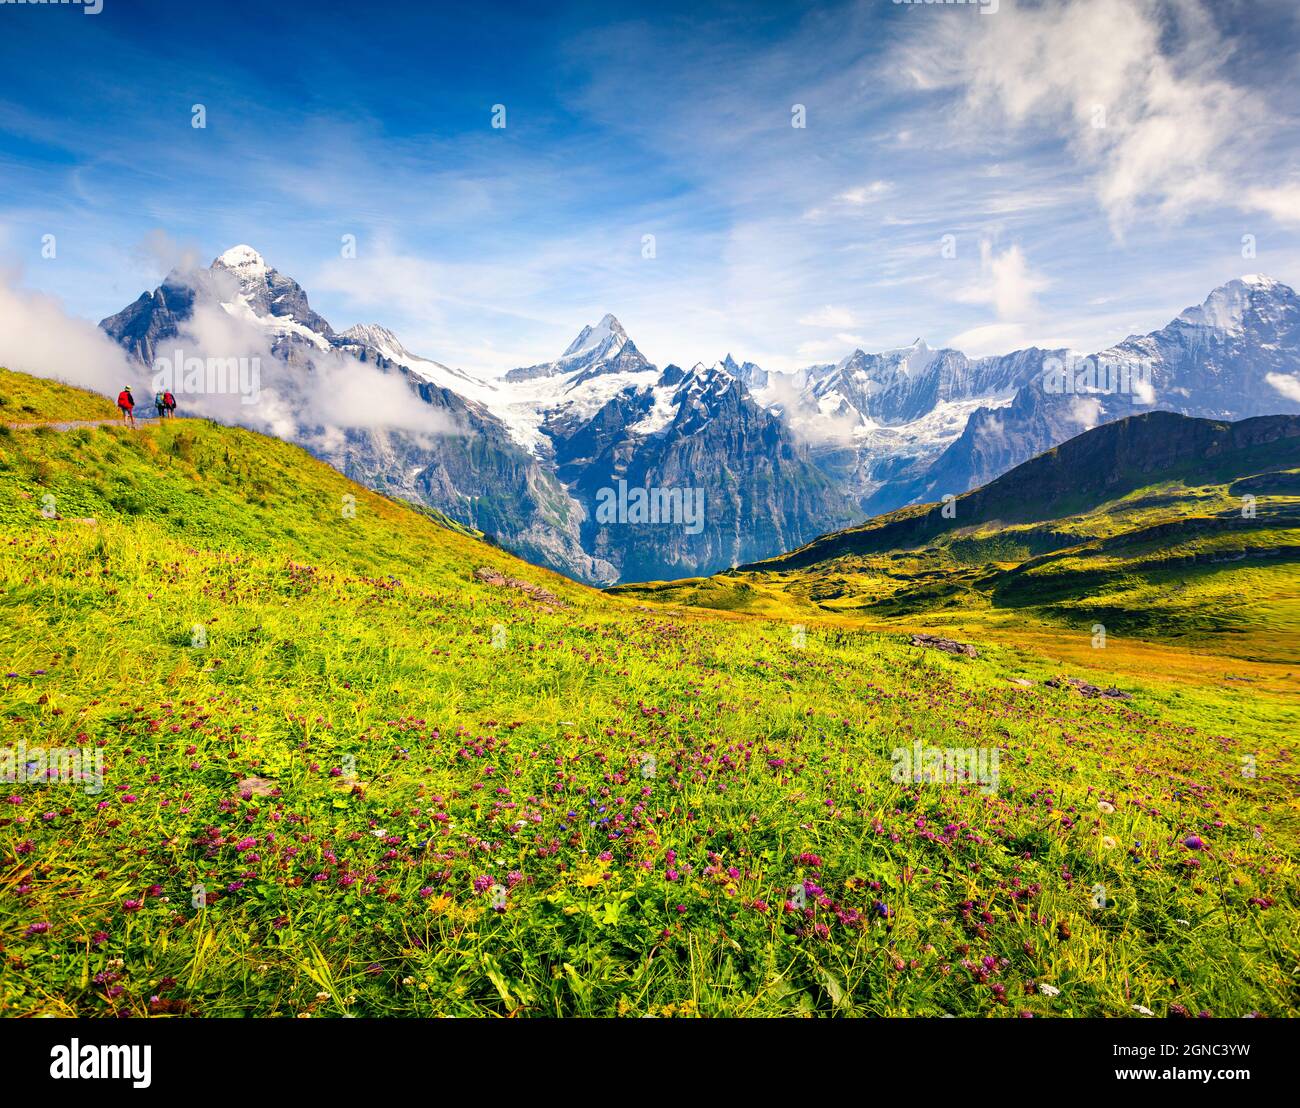 Colorful summer view near Bachalpsee lake with Schreckhorn and Wetterhorn peaks in the morning mist. Green morning scene in the Swiss Bernese Alps, Gr Stock Photo